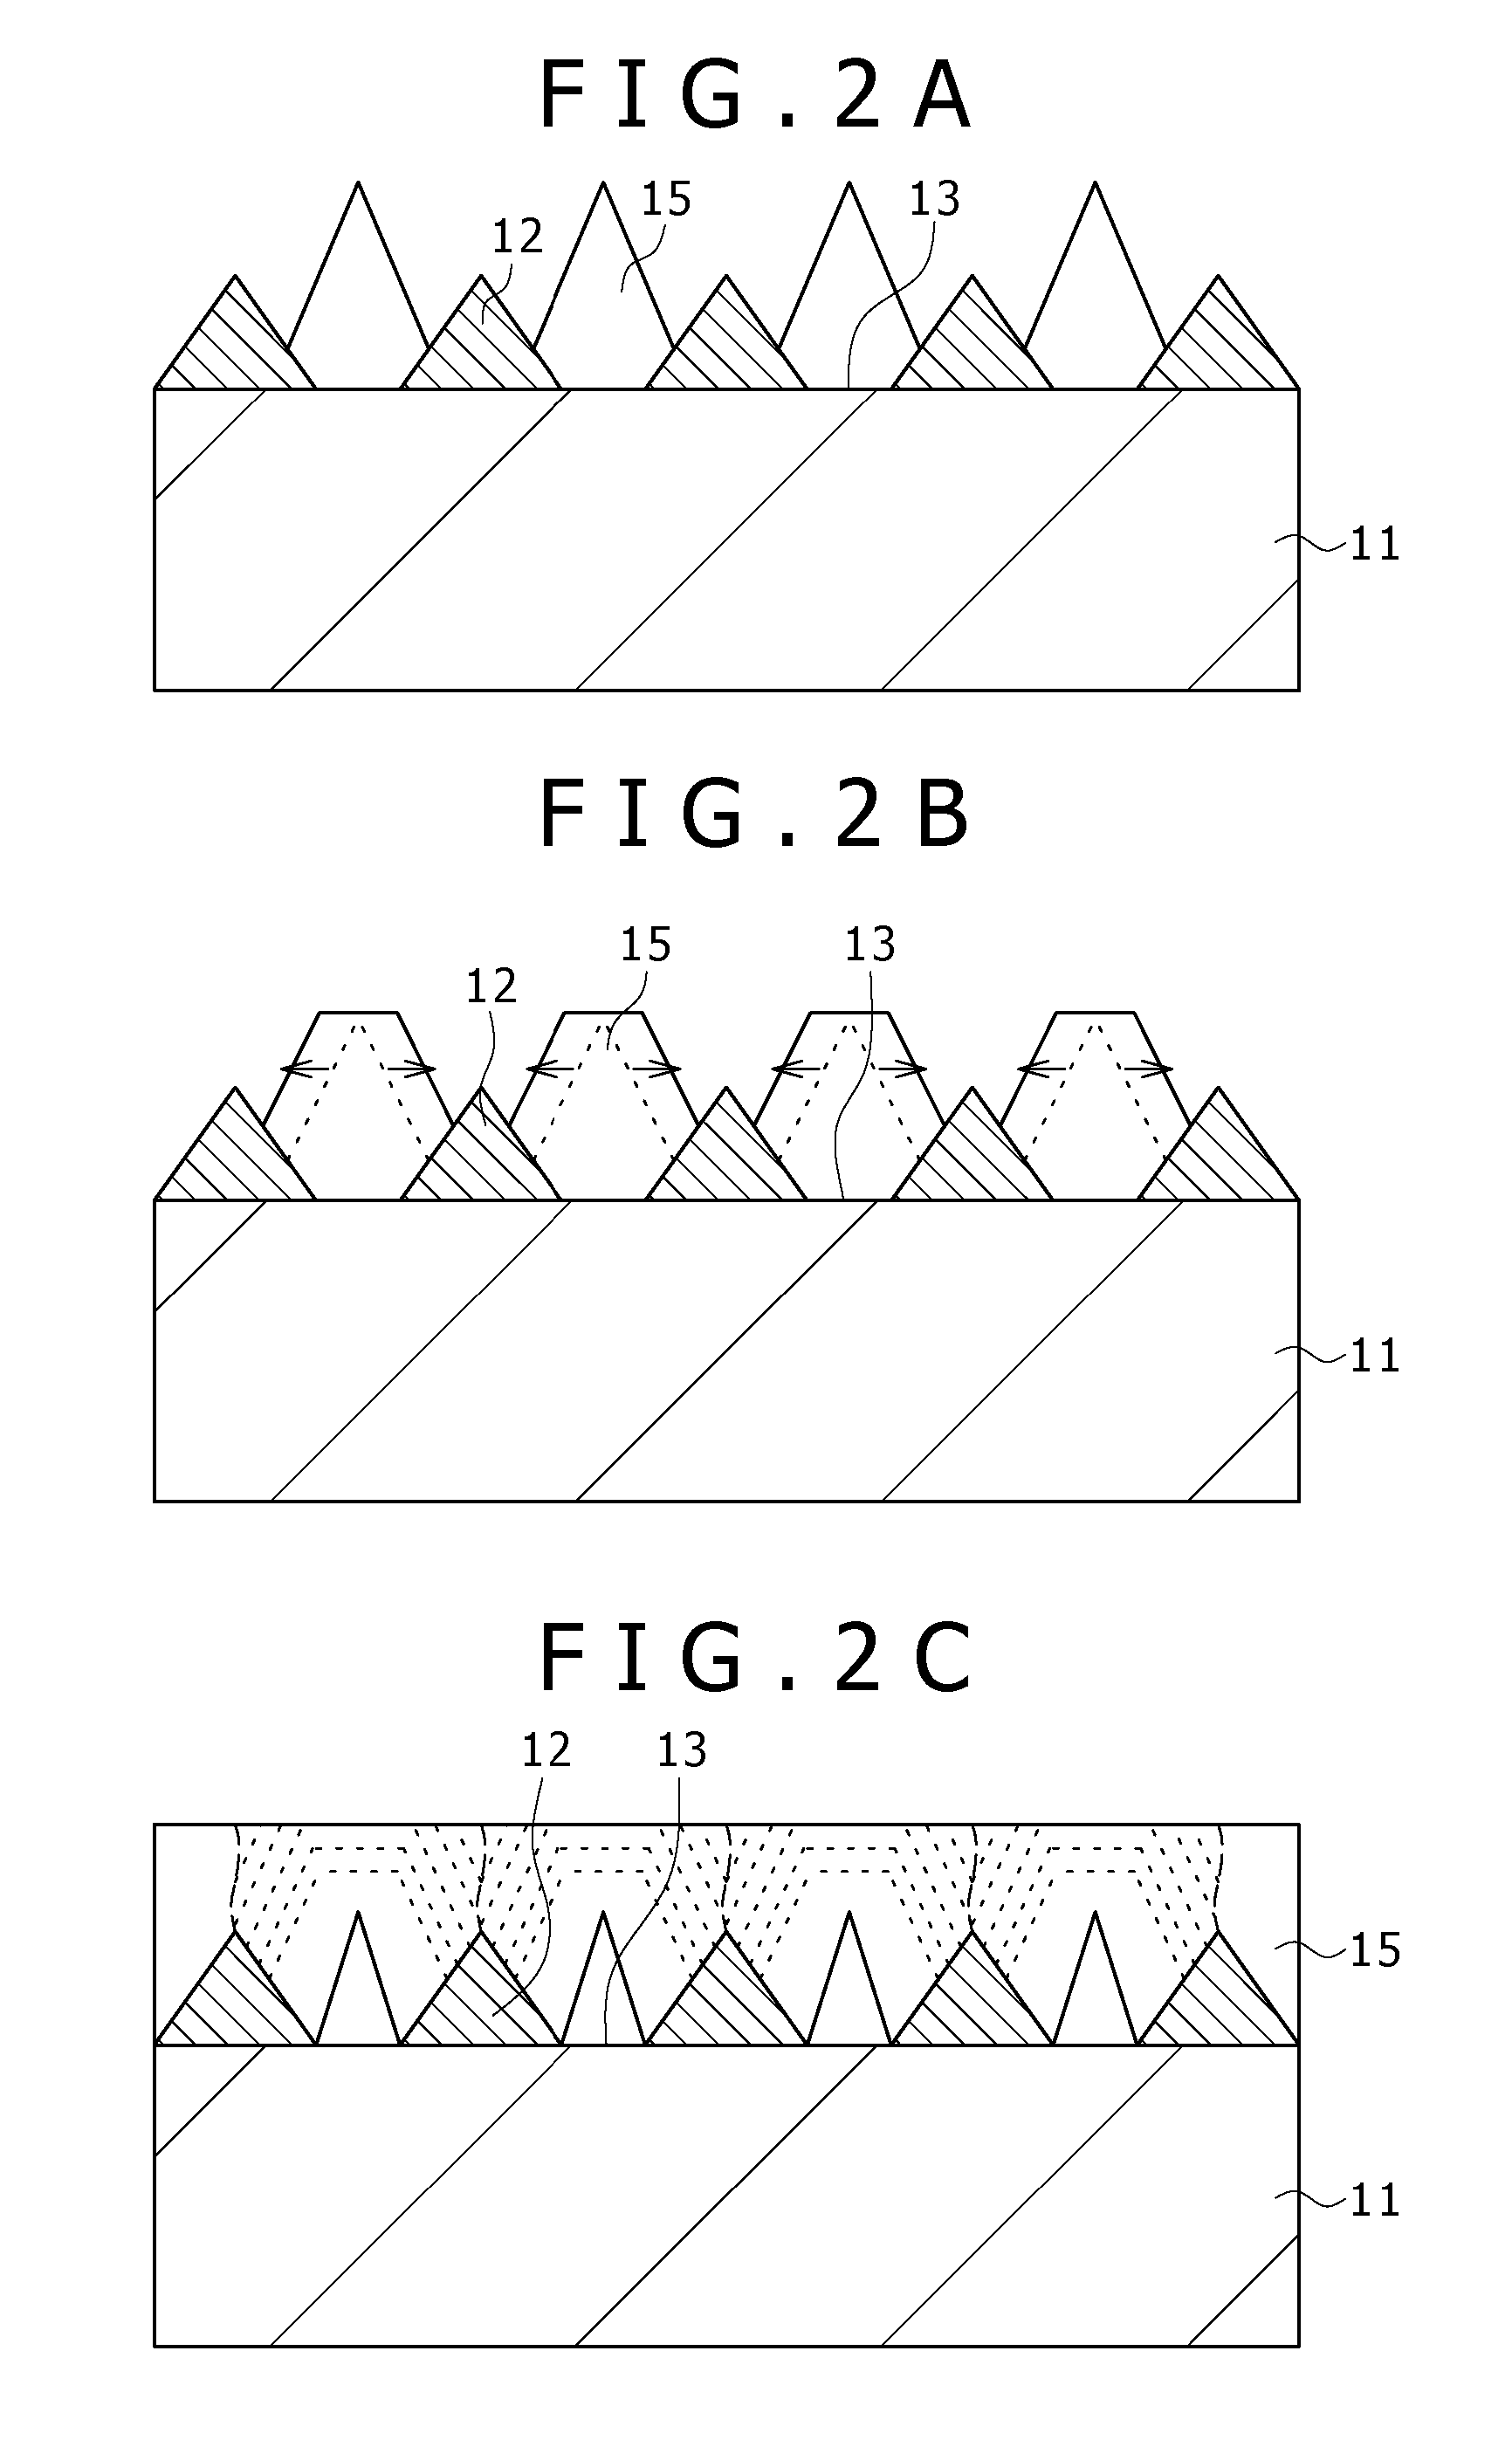 Light-emitting diode and method for manufacturing same, integrated light-emitting diode and method for manufacturing same, method for growing a nitride-based iii-v group compound semiconductor, substrate for growing a nitride-based iii-v group compound semiconductor, light source cell unit, light-emitting diode backlight, light-emitting diode illuminating device, light-emitting diode display and electronic instrument, electronic device and method for manufacturing same